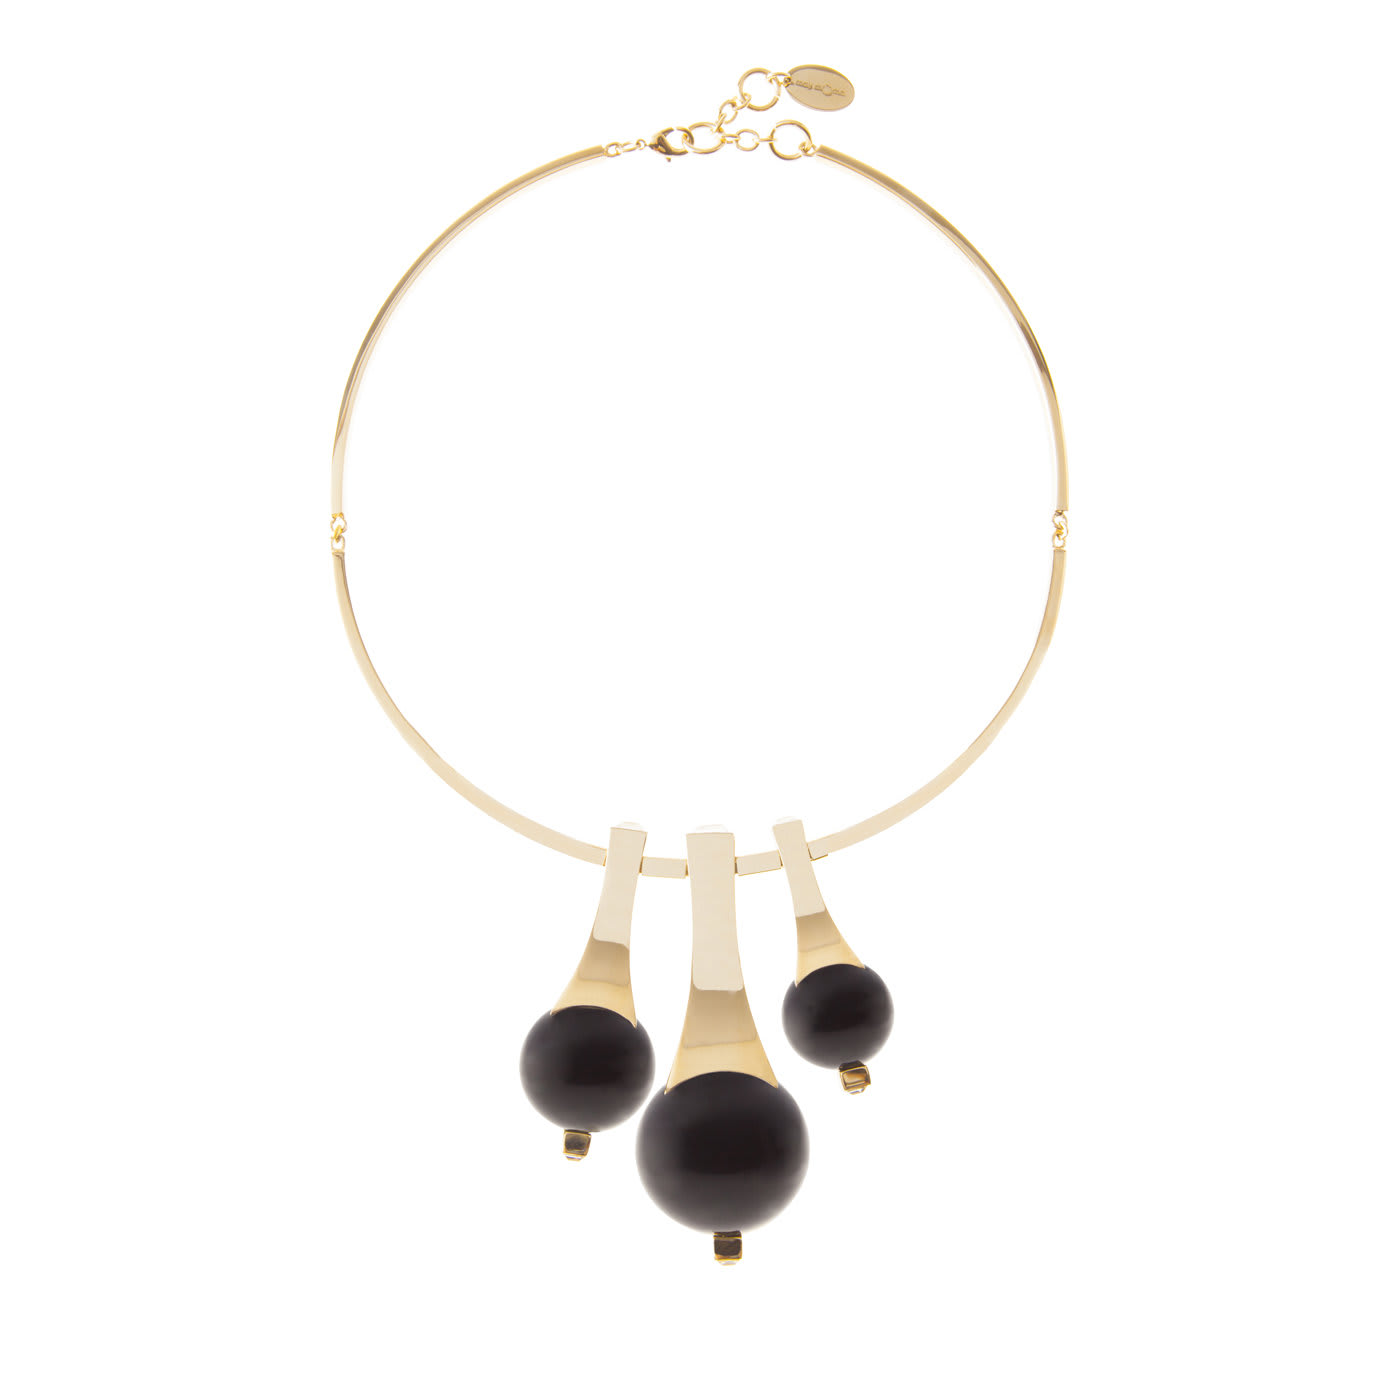 Gea Necklace with Three Black Spheres - May Moma